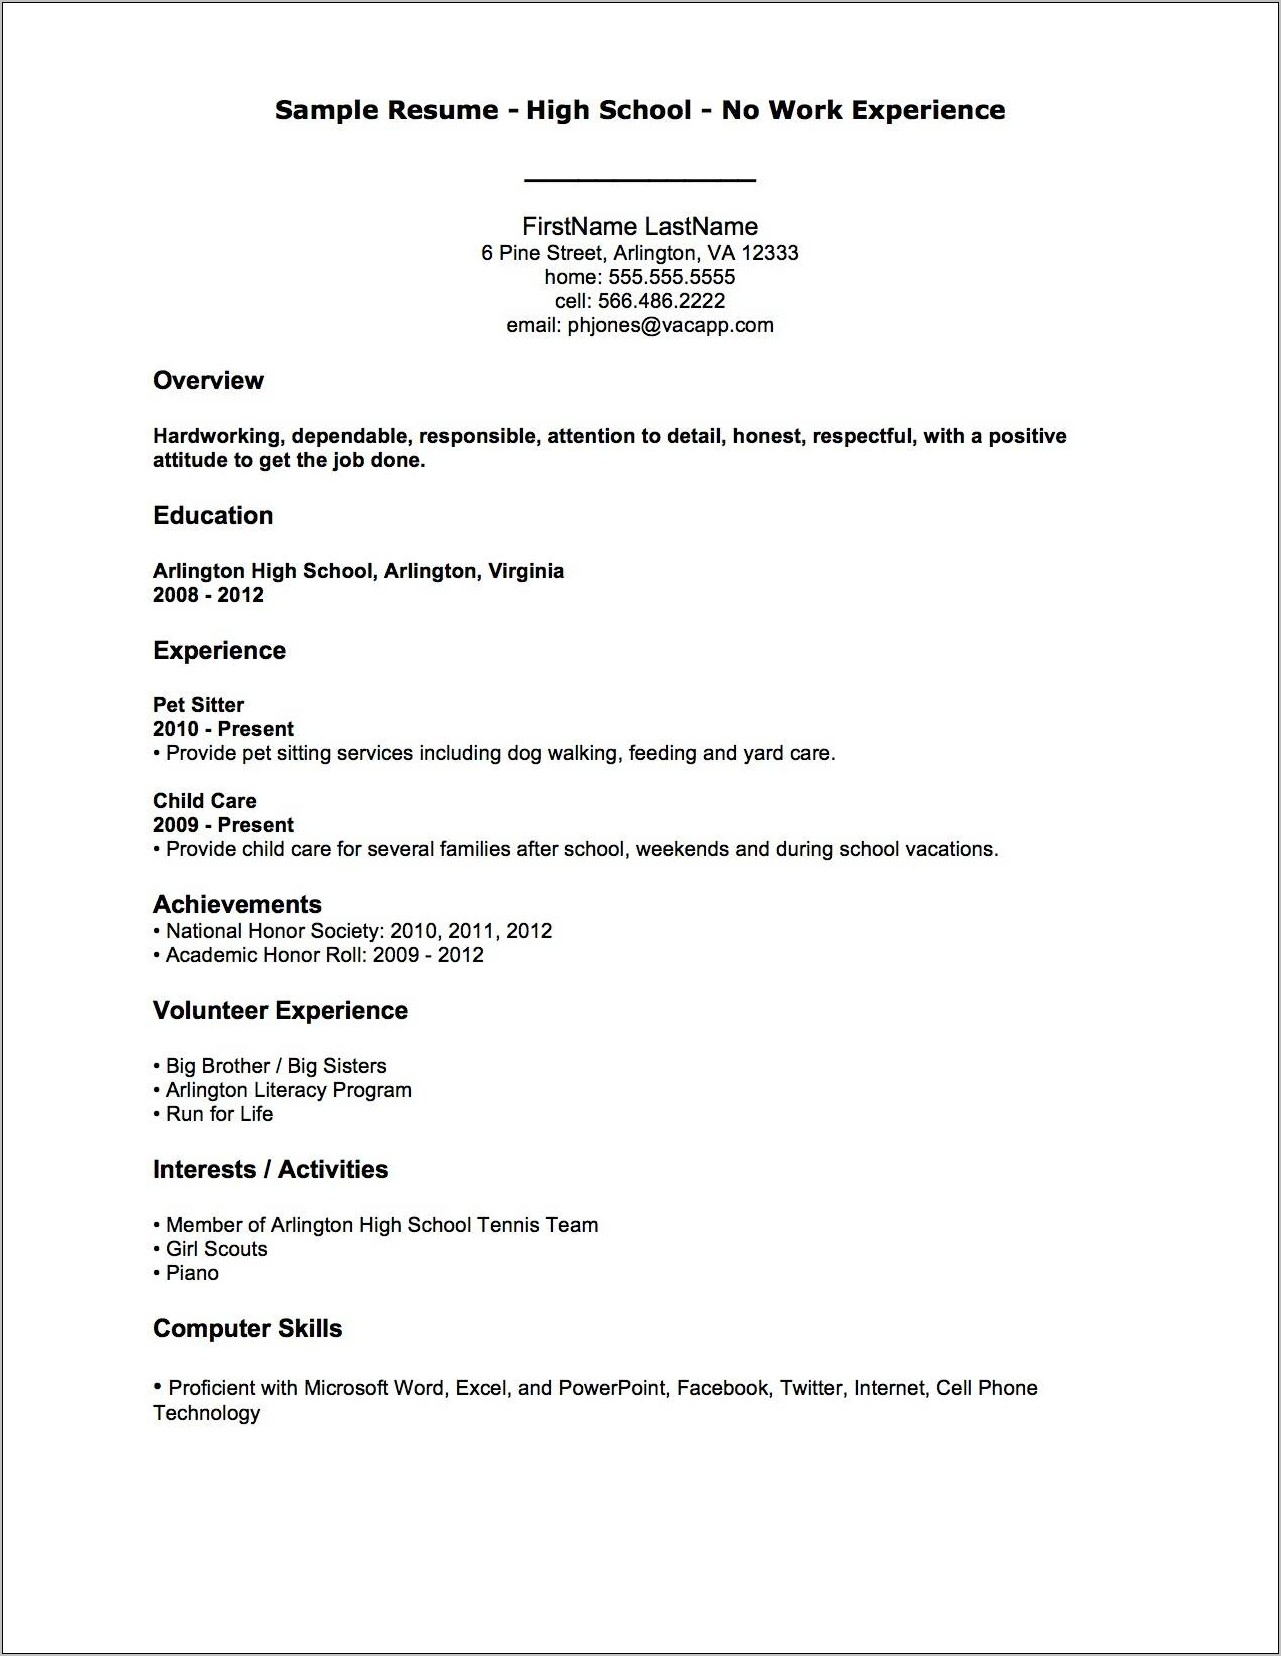 Sample Resume For No Experience College Student